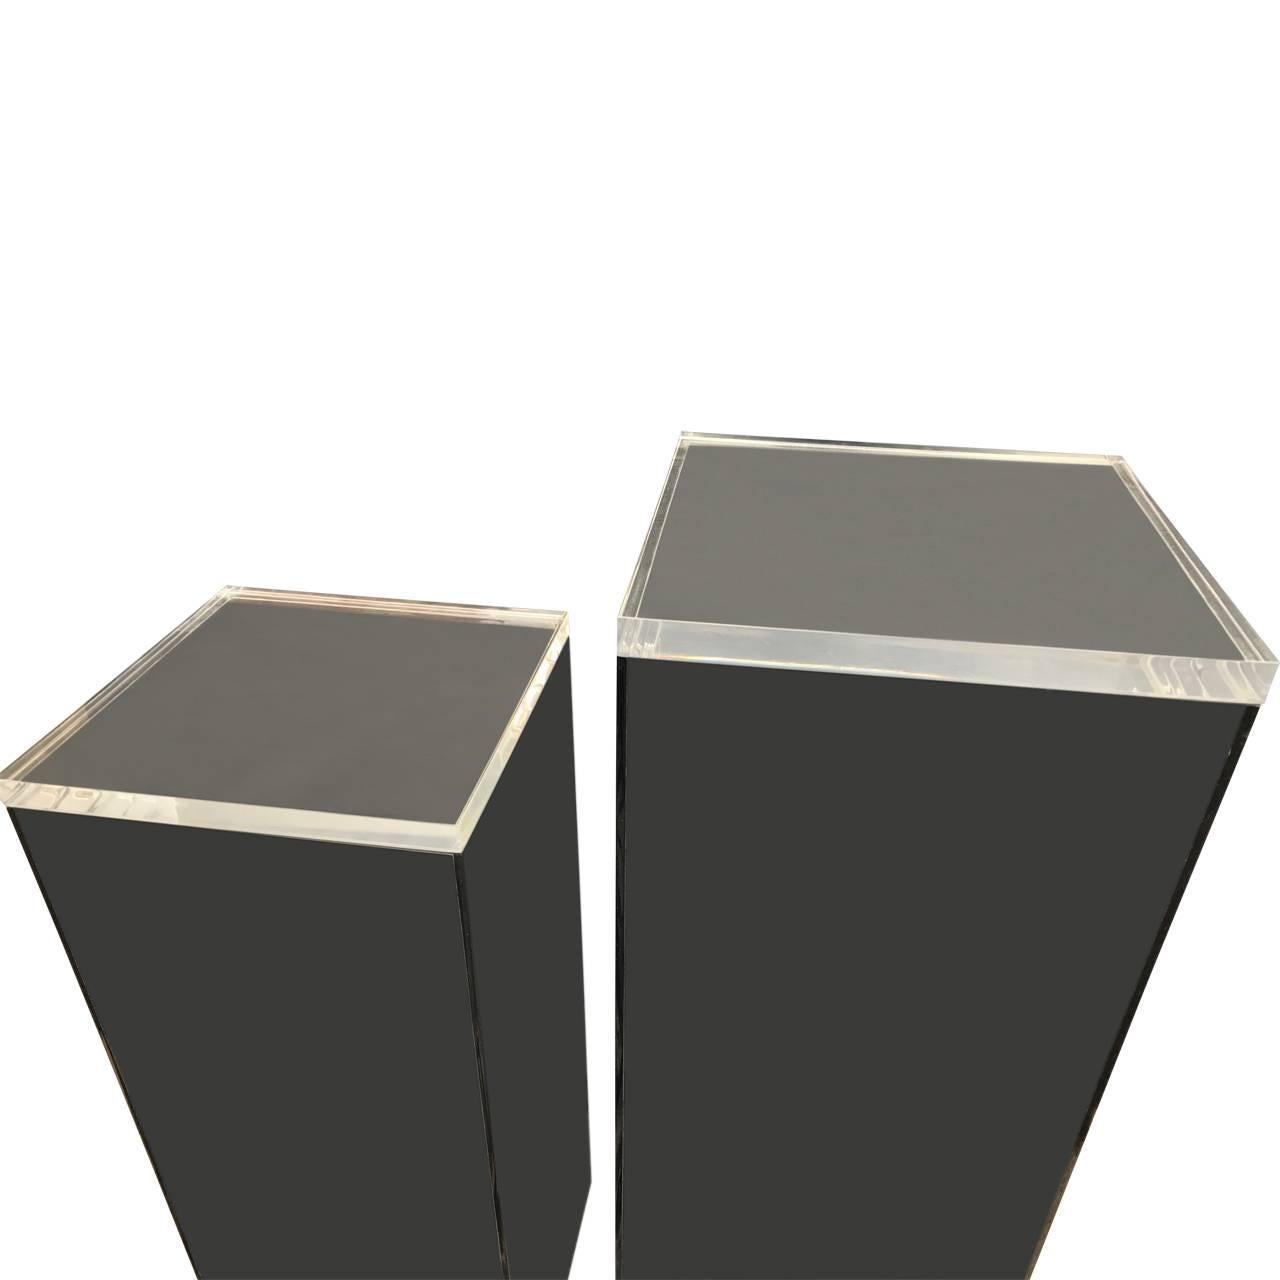 Two Lucite art pedestals both with smoked Lucite base and separate clear Lucite tops.

Pedestals measure 30